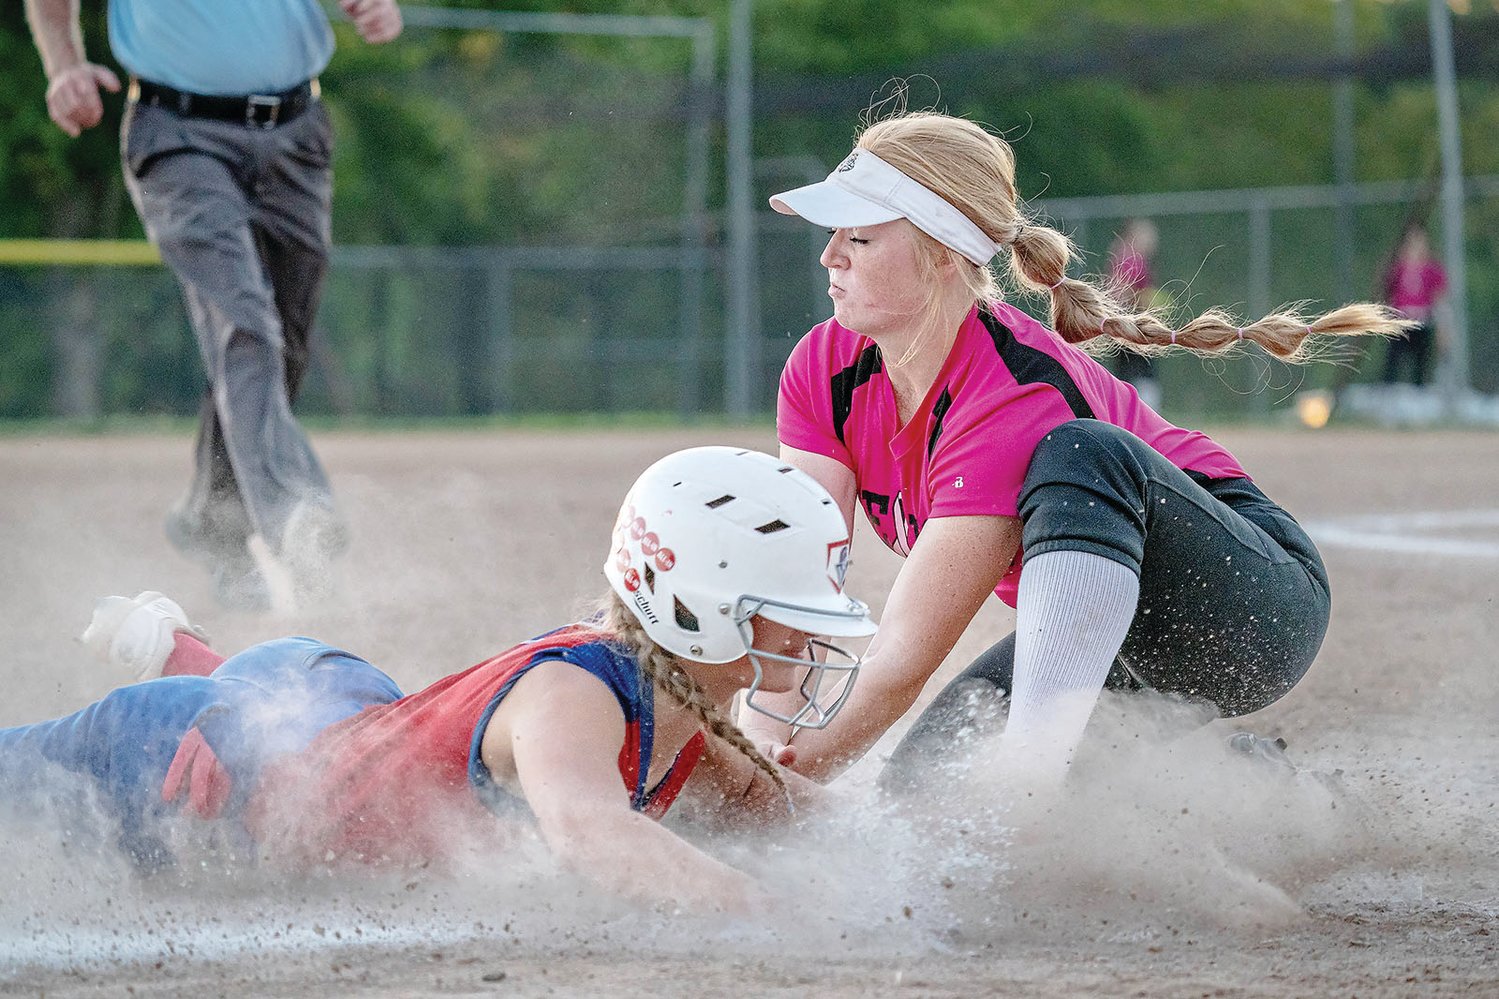 Moberly’s Chloe Ferguson slides into third base safely before Mexico third baseman Abby Bellamy has a chance to apply the tag during Tuesday’s North Central Missouri Conference game at Gallop Field in Mexico. The Spartans suffered a 12-11 loss to the Bulldogs, snapping a four-game winning streak.